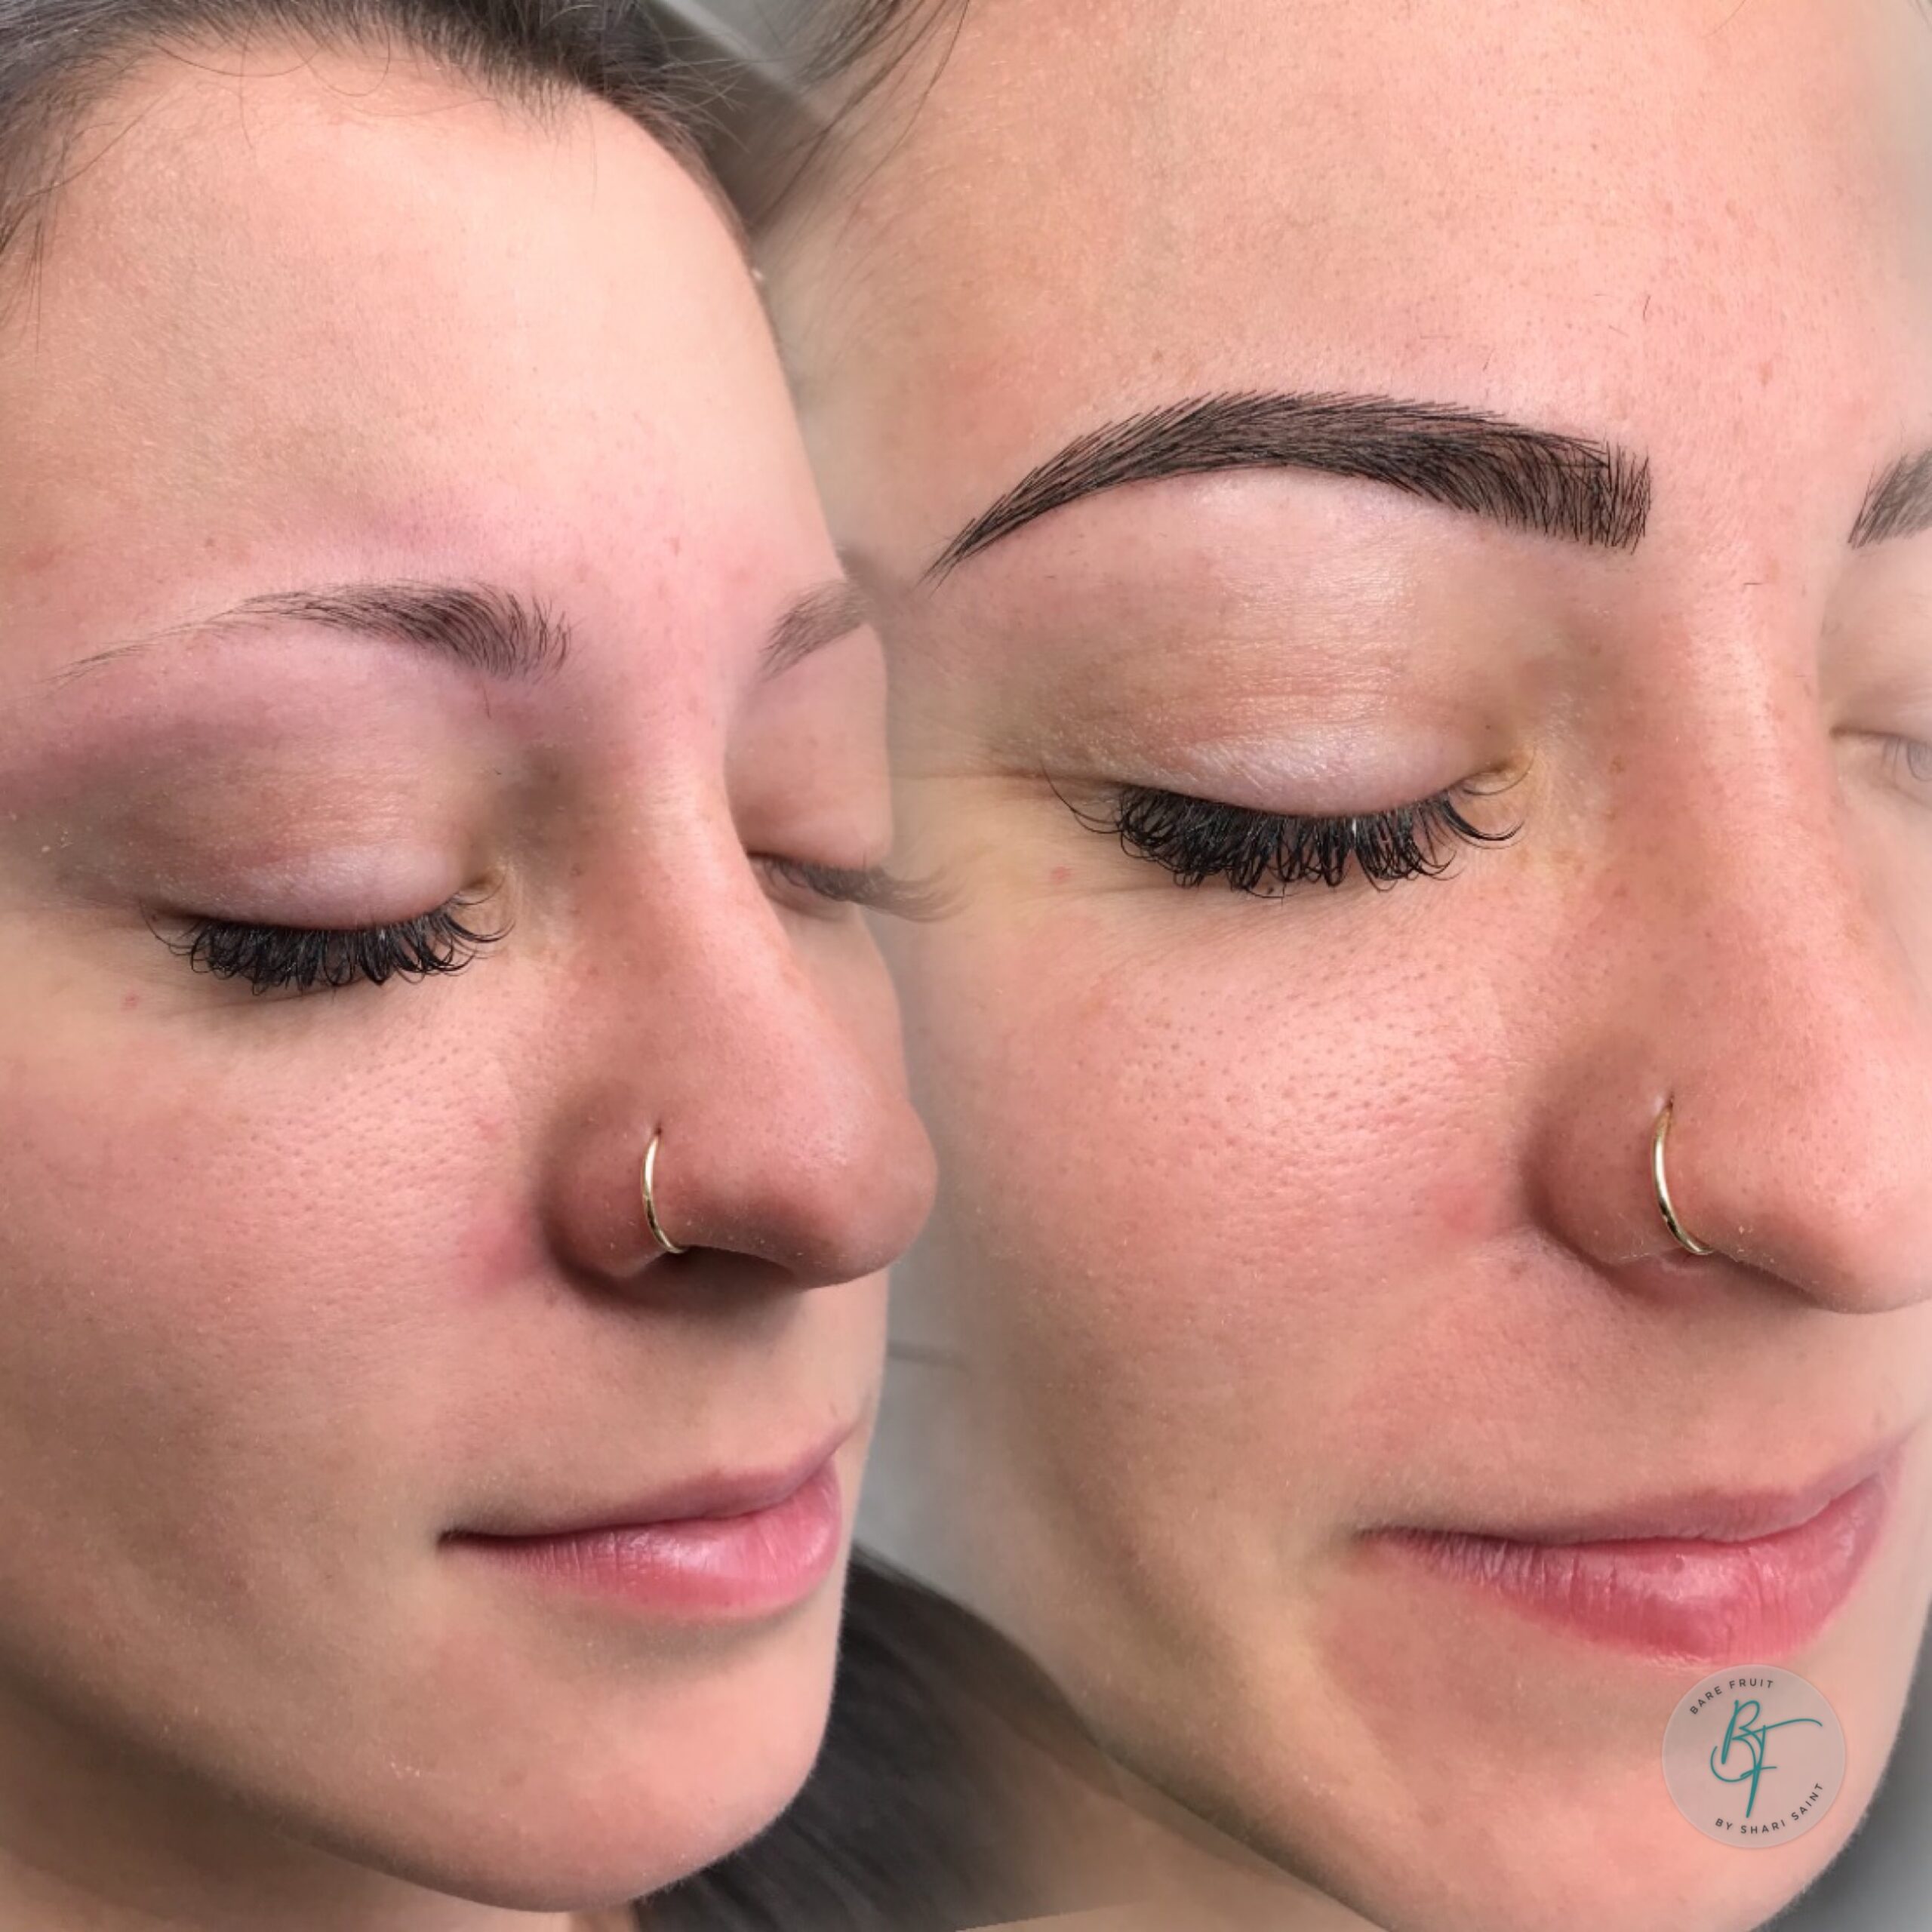 eyebrow extensions with bare fruit sugaring and brows shari saint long island eyebrows